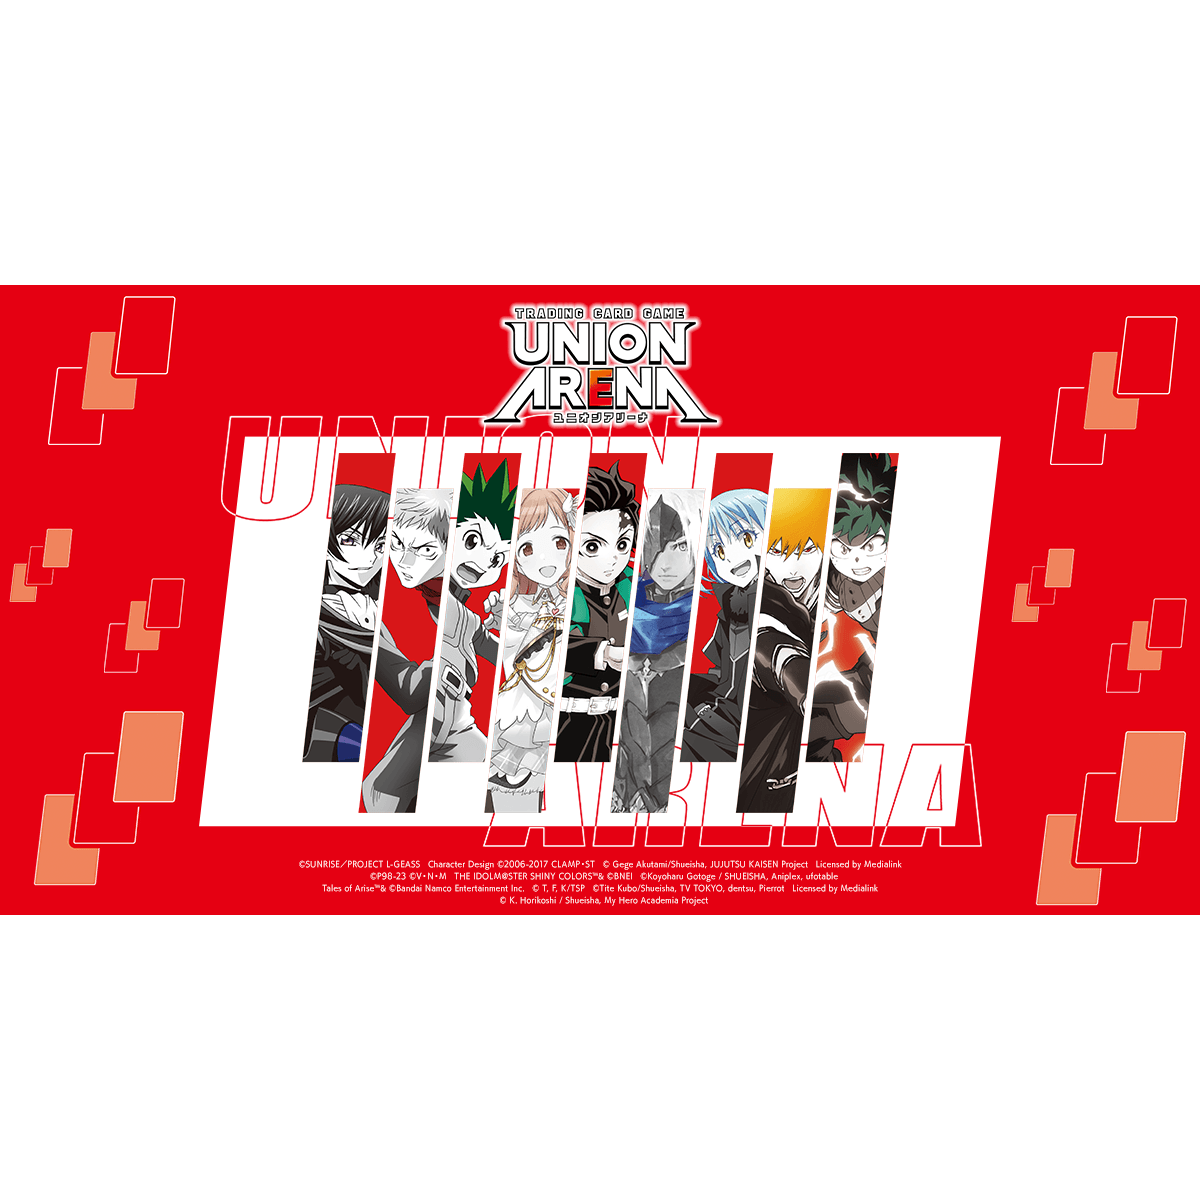 Union Arena Official Sleeve &quot;Bleach: Thousand Year Blood War&quot;-Bandai-Ace Cards &amp; Collectibles